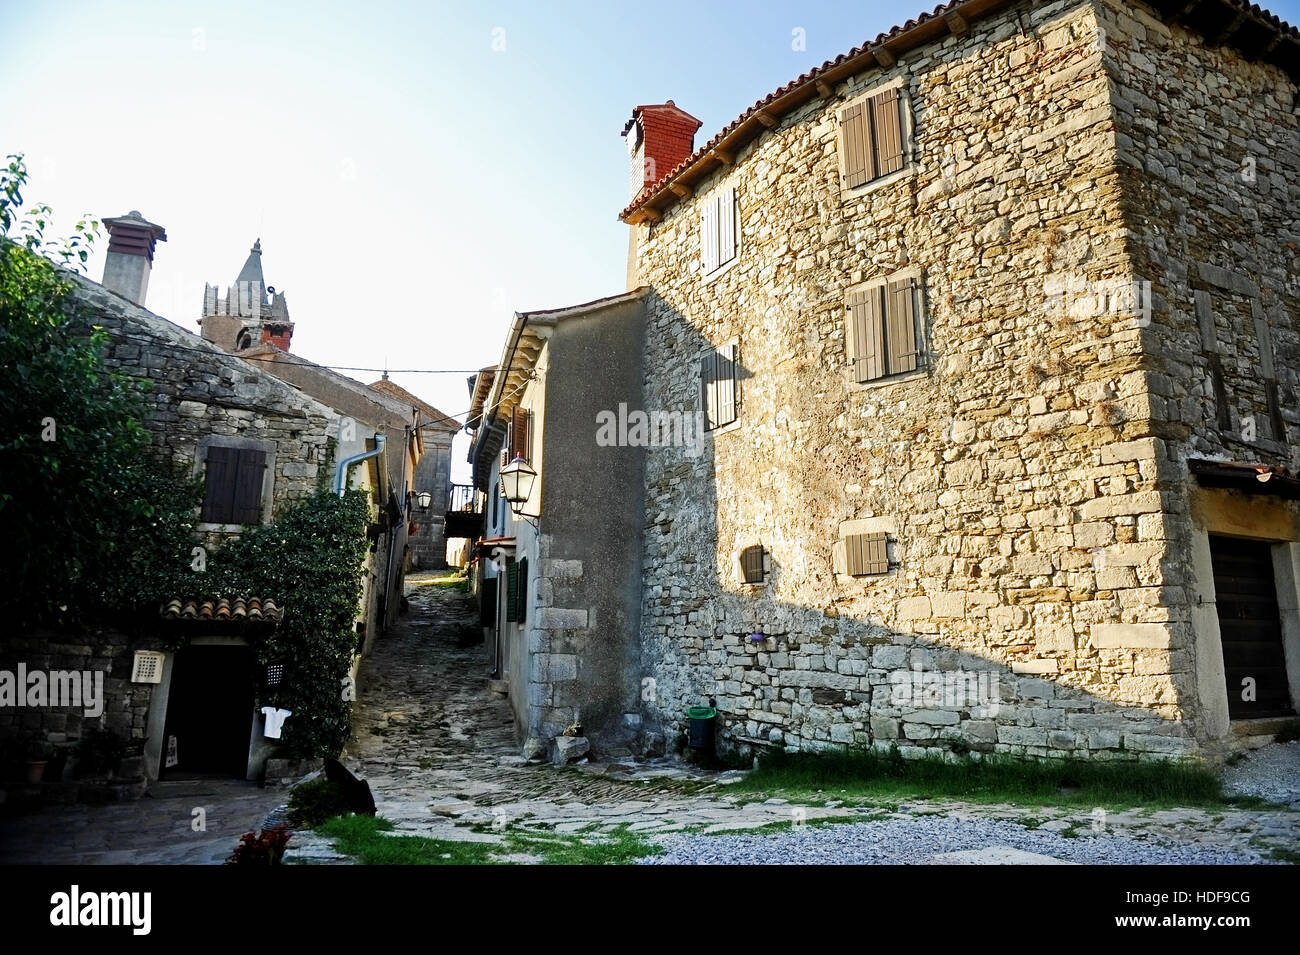 Street view in the city of Hum, known as the smallest city in the world, in Croatia. Stock Photo